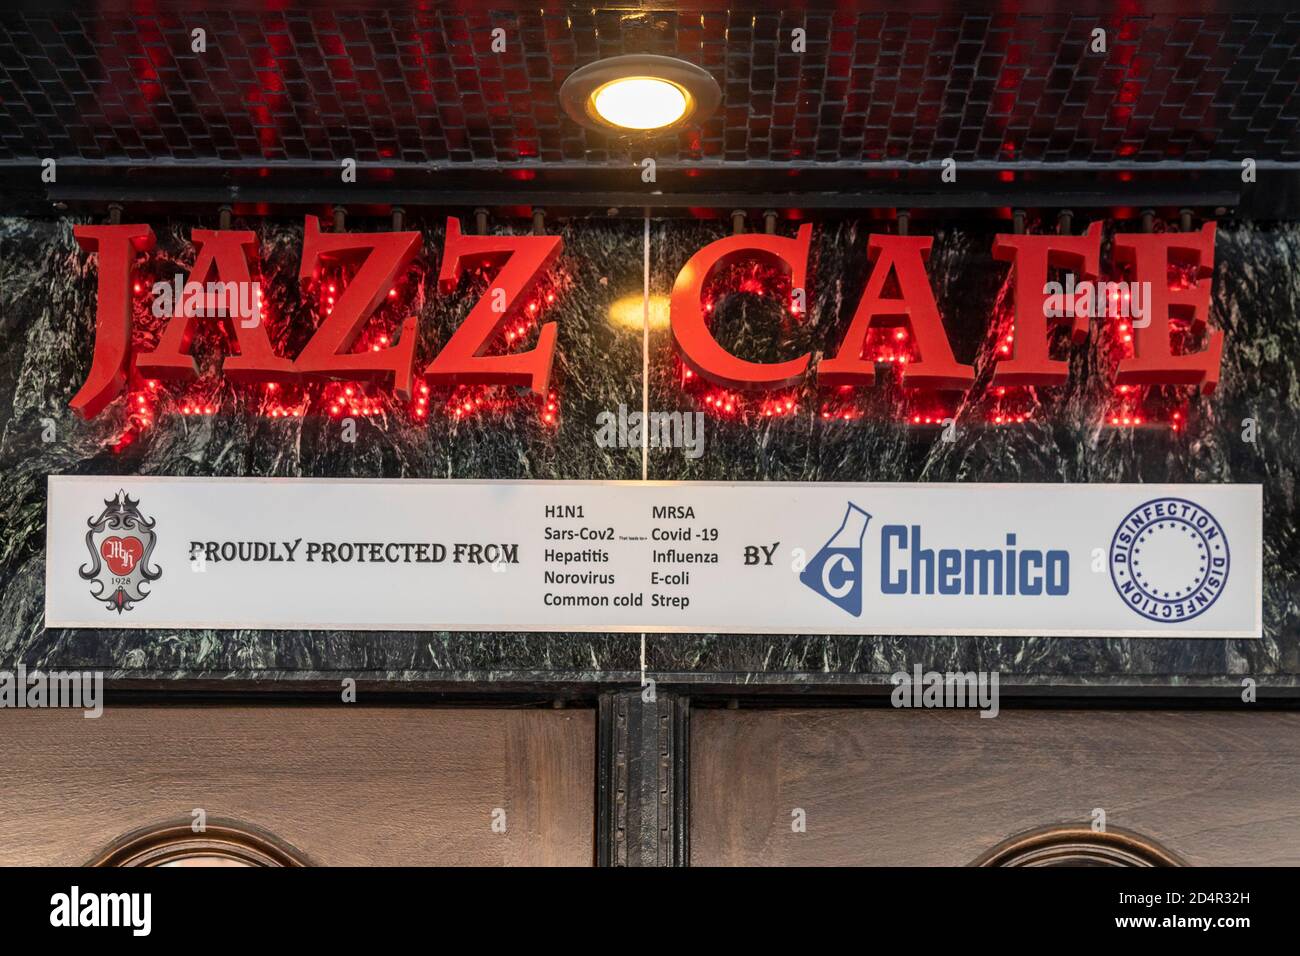 Detroit, Michigan - The Jazz Cafe at Music Hall lists all the diseases patrons are said to be protected from by Chemico disinfectants. Stock Photo